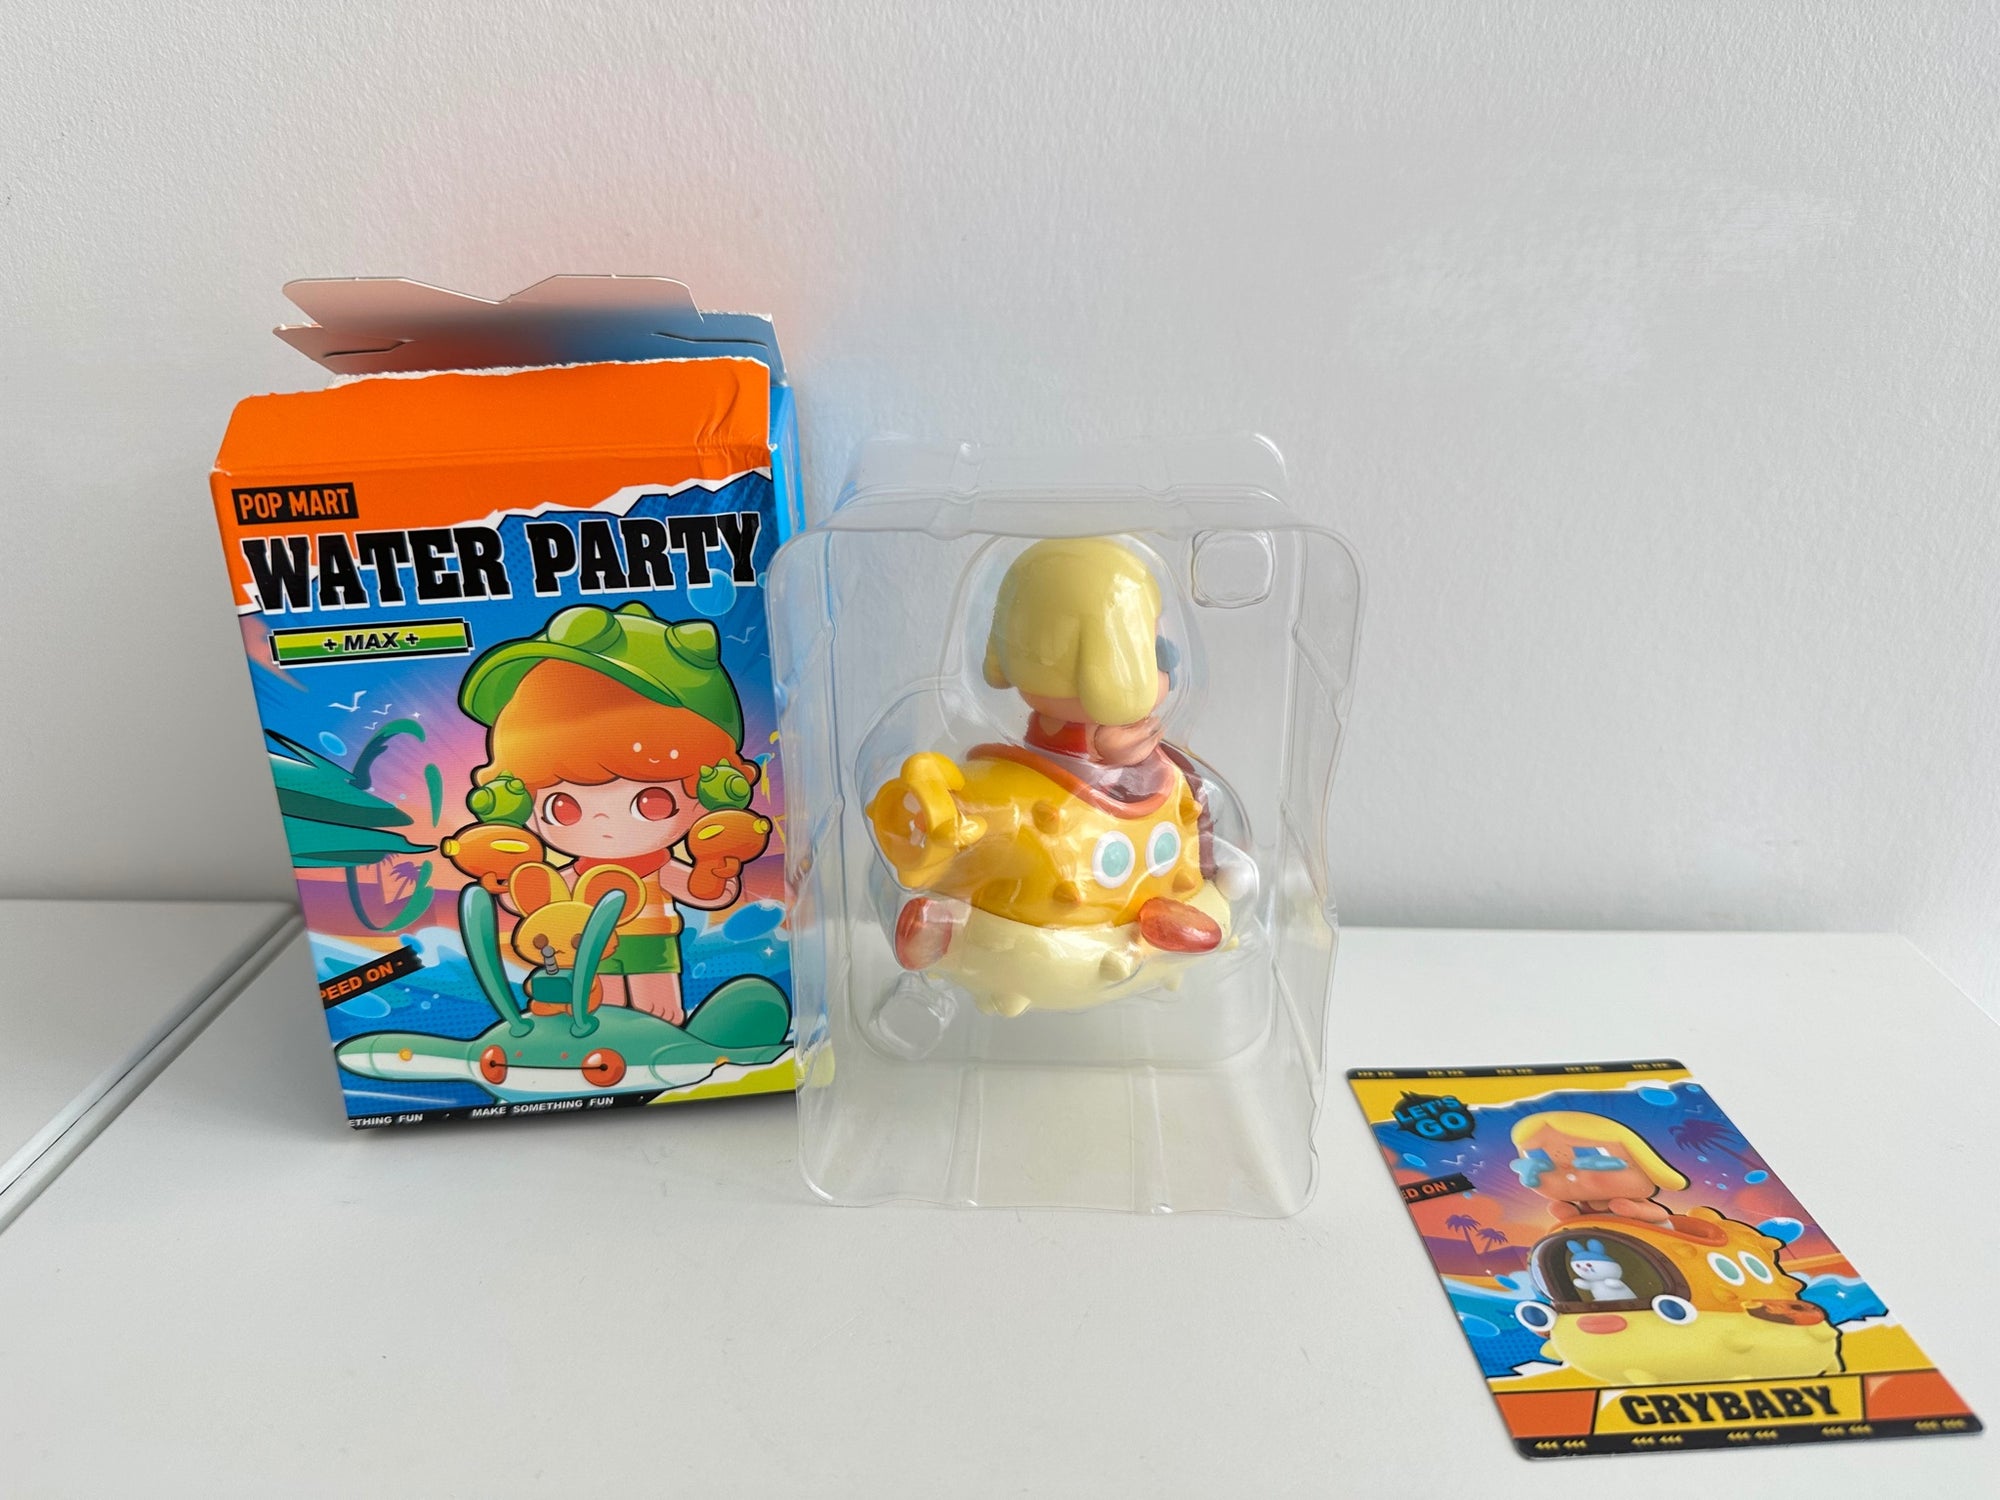 Crybaby - POPCAR Water Party Series by POP MART - 1